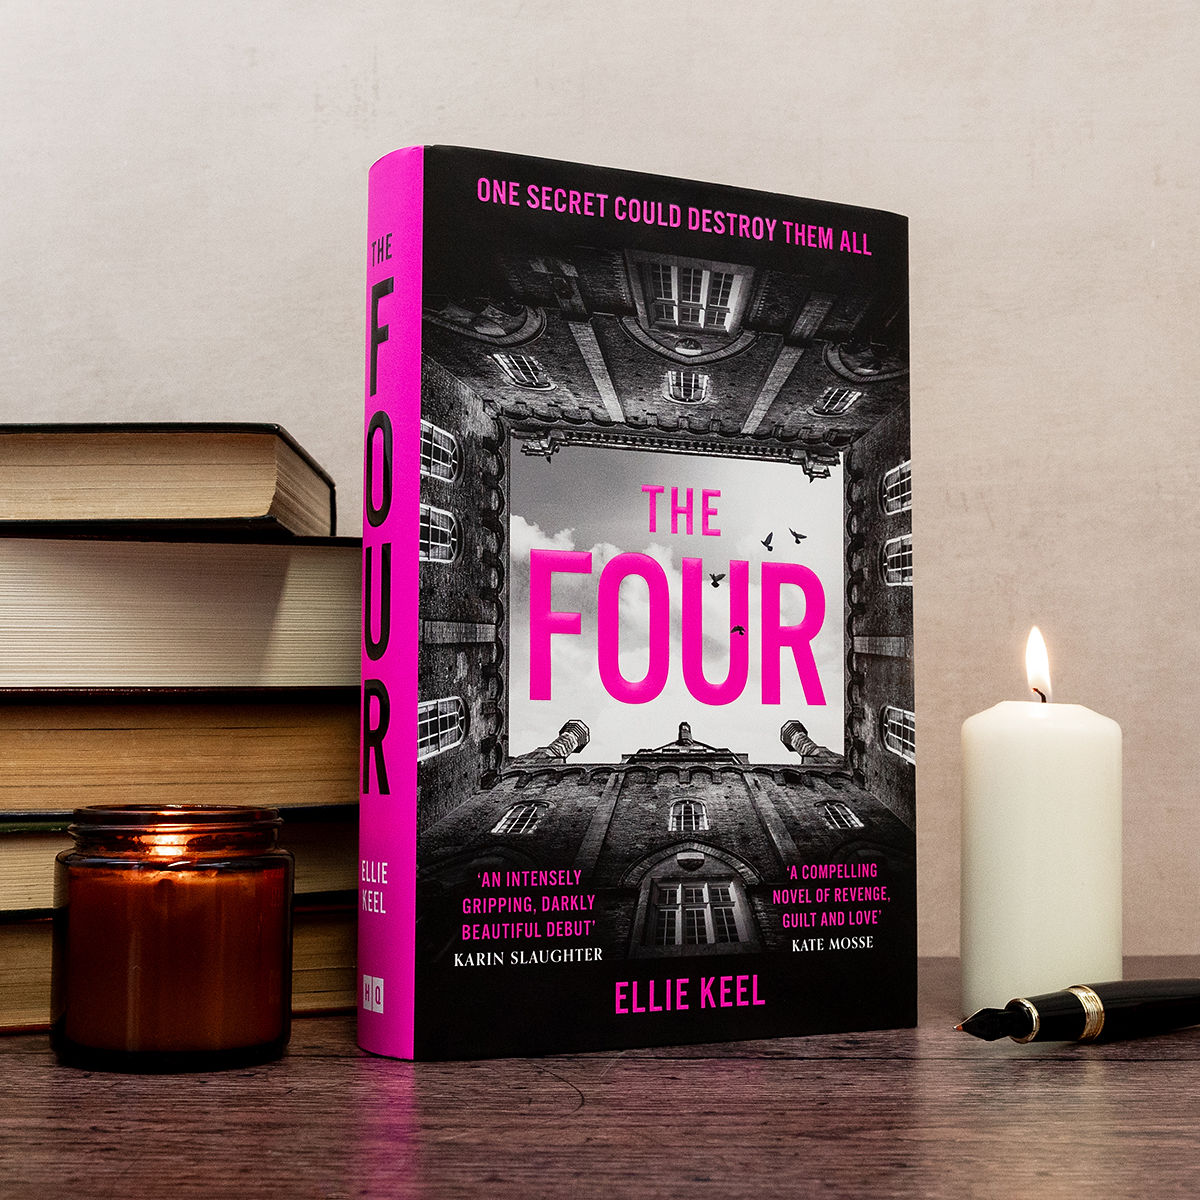 'Complex and heart wrenching and oh so gripping' ⭐⭐⭐⭐⭐ 'From the first page the action begins' ⭐⭐⭐⭐⭐ 'Vivid, visceral and unrelentingly addictive' ⭐⭐⭐⭐⭐ We love these @Waterstones reviews of The Four by @elliekeel1! Pre-order your copy 👉 bit.ly/3vAB6jr